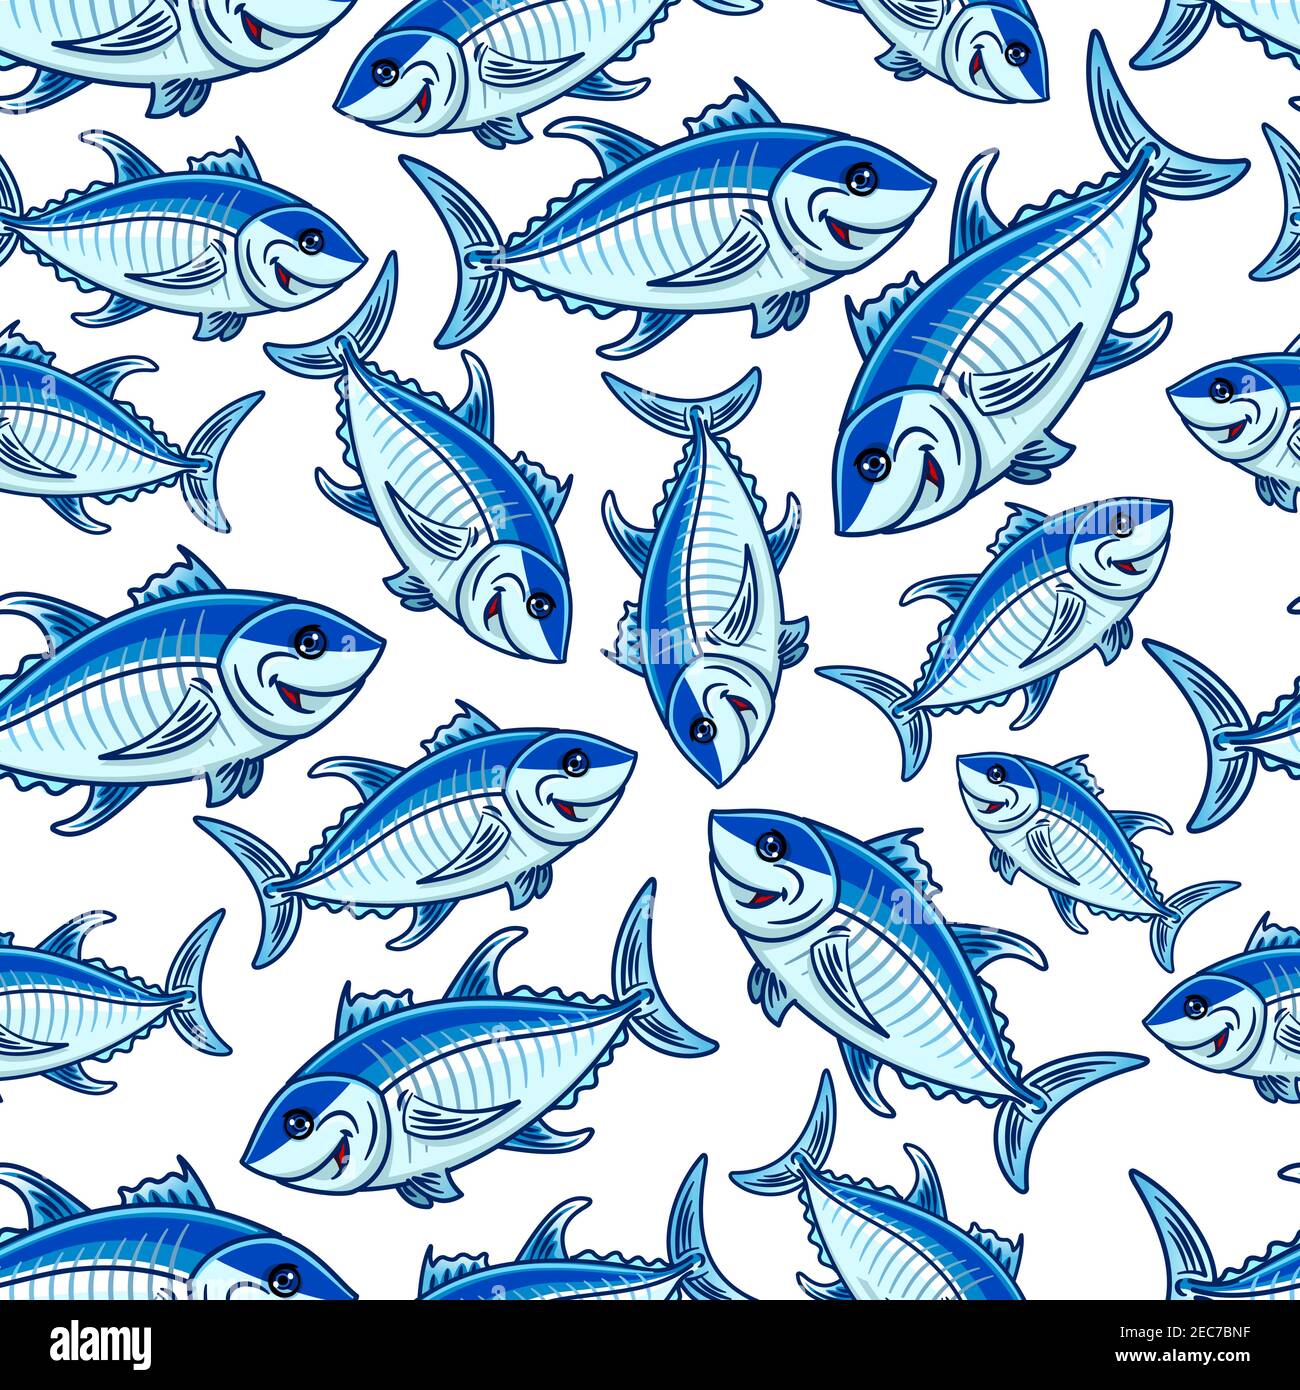 Swimming blue fishes seamless pattern with flock of cartoon atlantic tuna fishes over white background. Seafood and fishing sport themes design Stock Vector